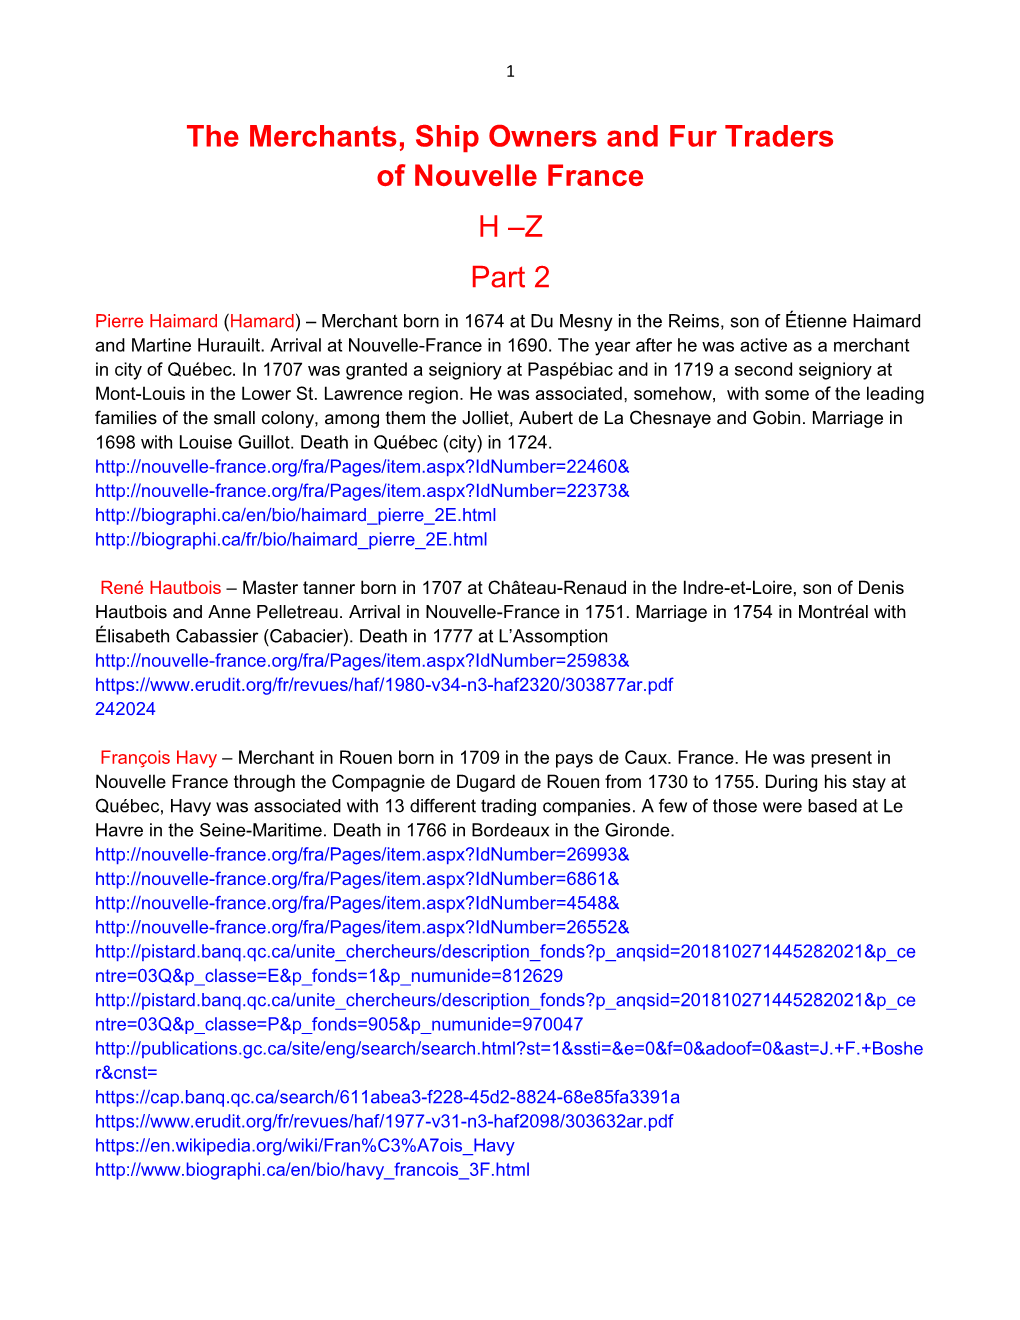 The Merchants, Ship Owners and Fur Traders of Nouvelle France H –Z Part 2